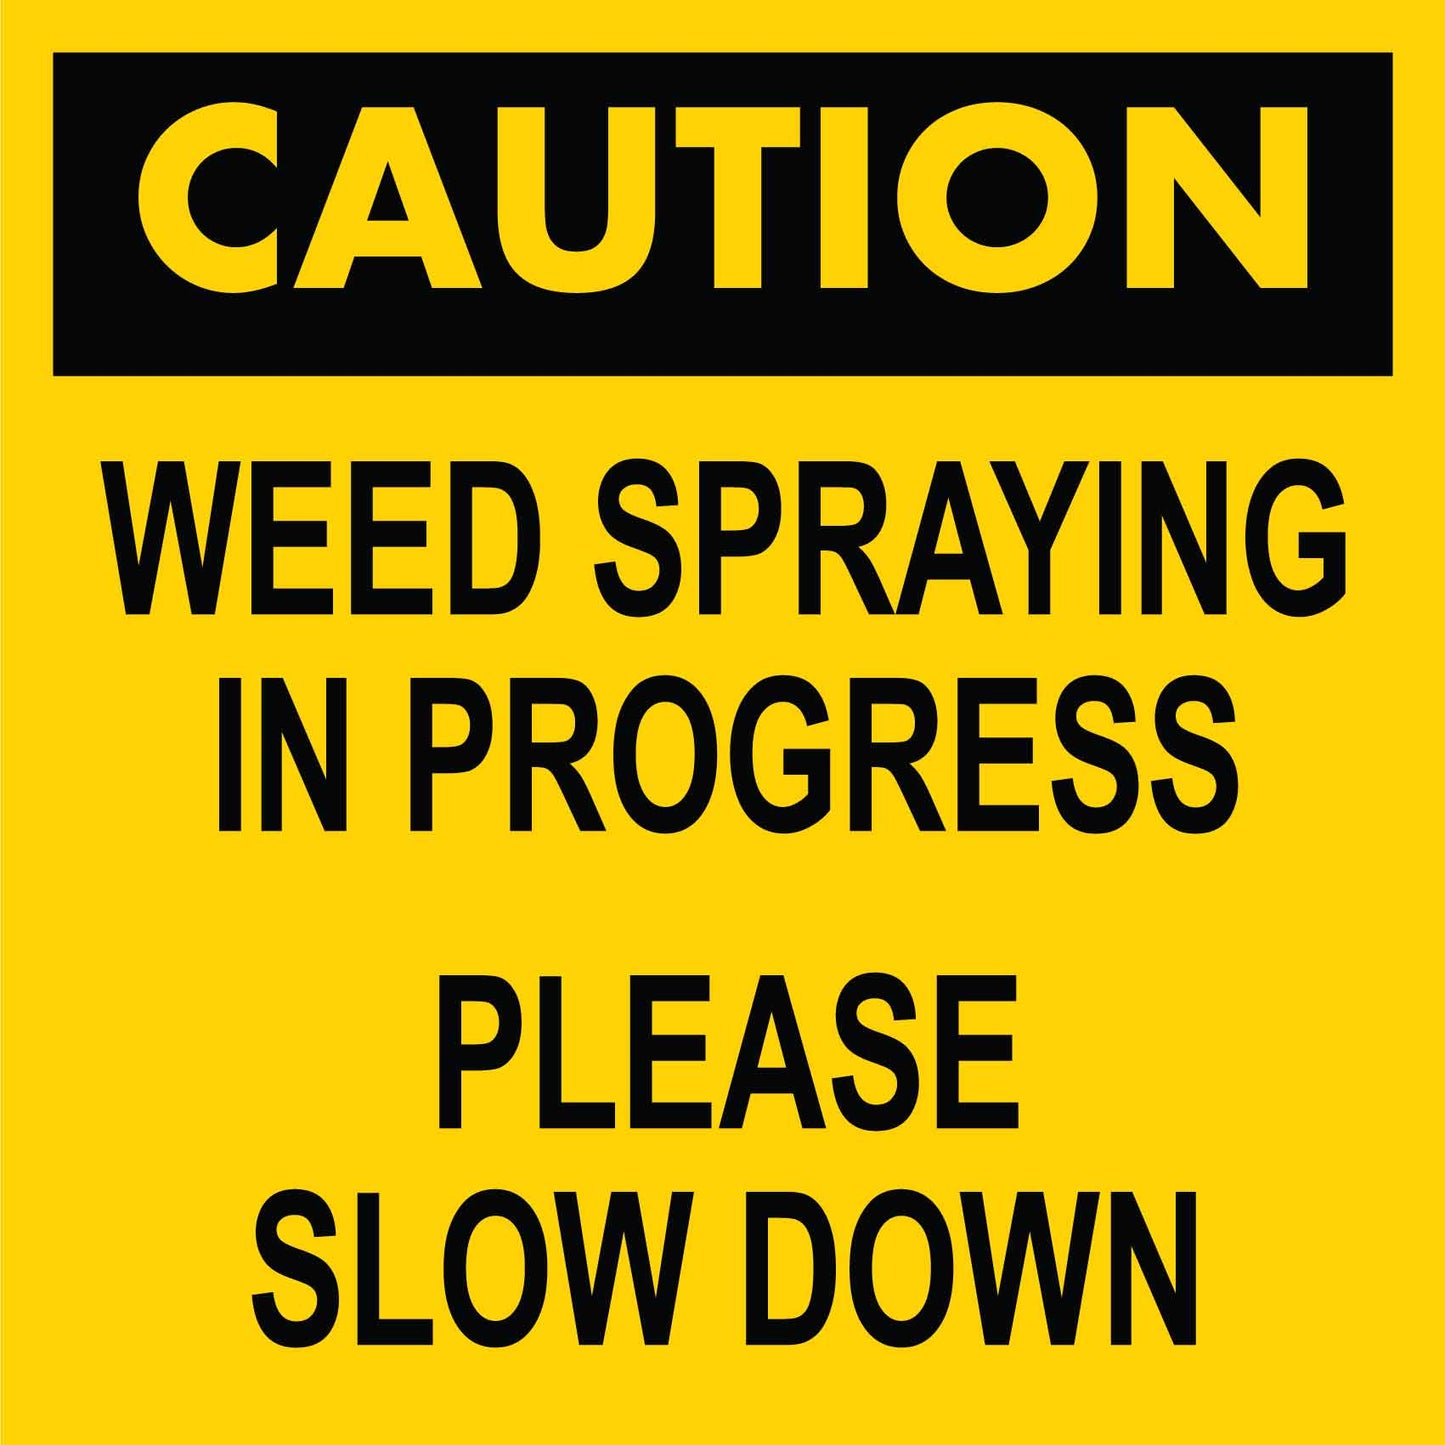 Caution Weed Spraying In Progress Please Slow Down Multi Message Traffic Sign